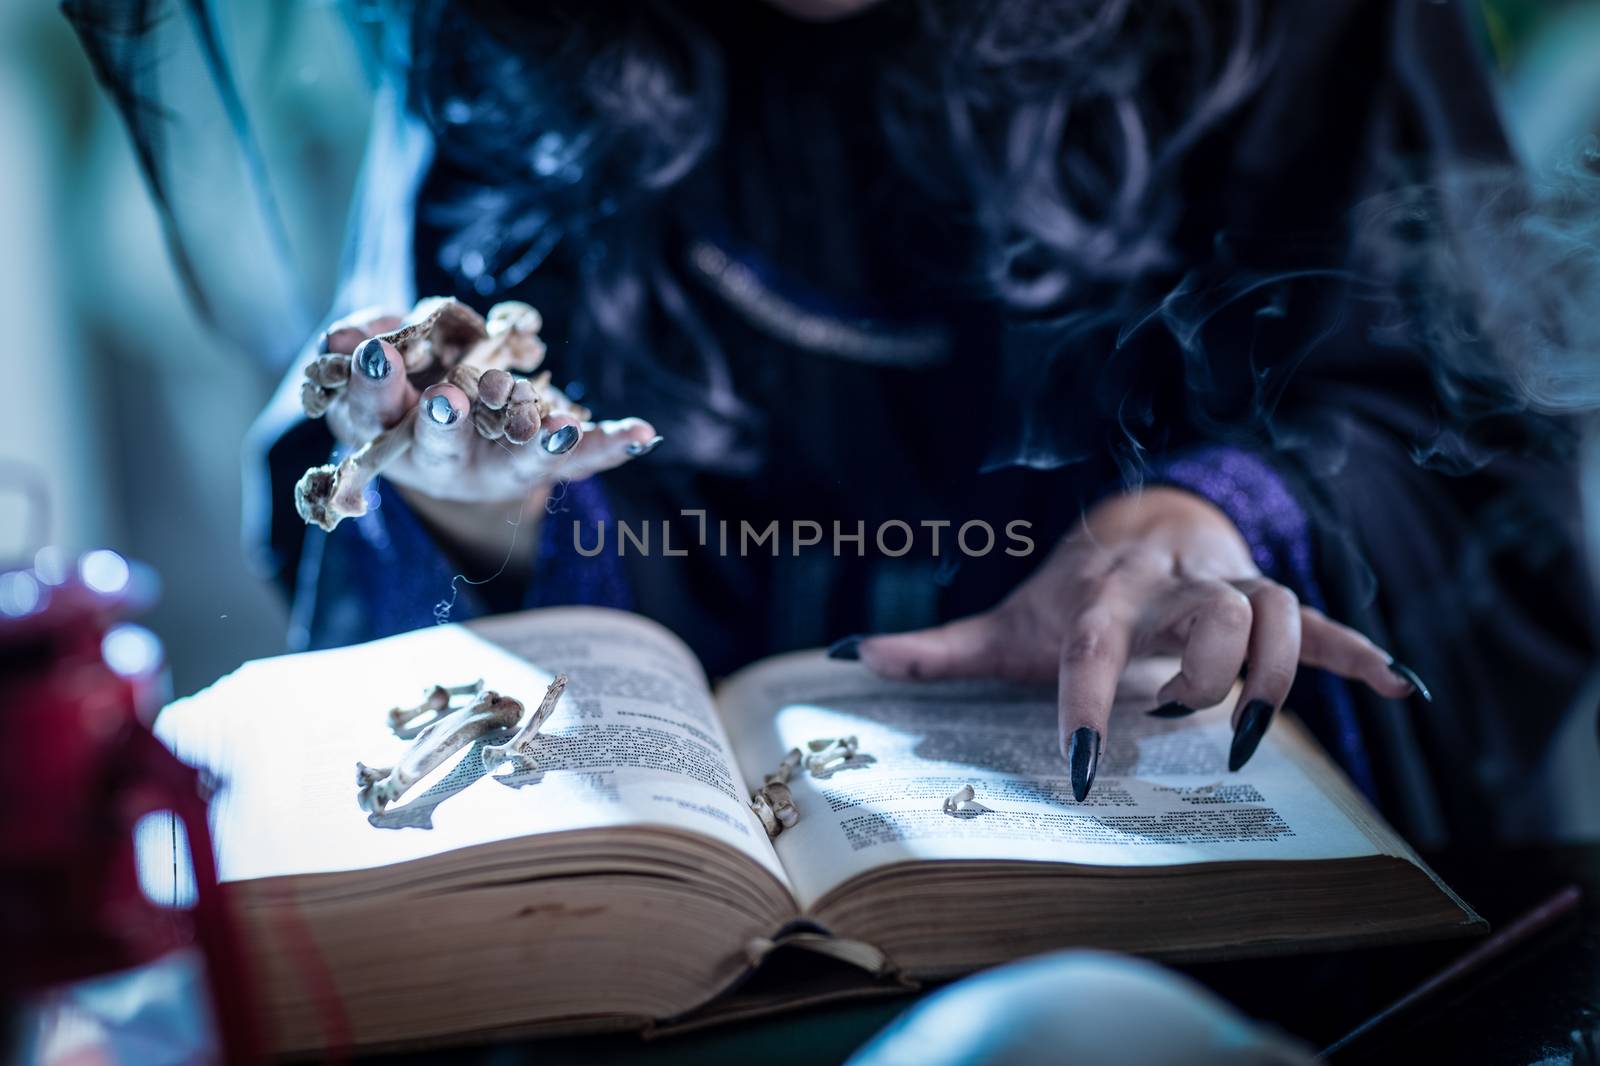 Wicth's Hand On Magic Book by MilanMarkovic78